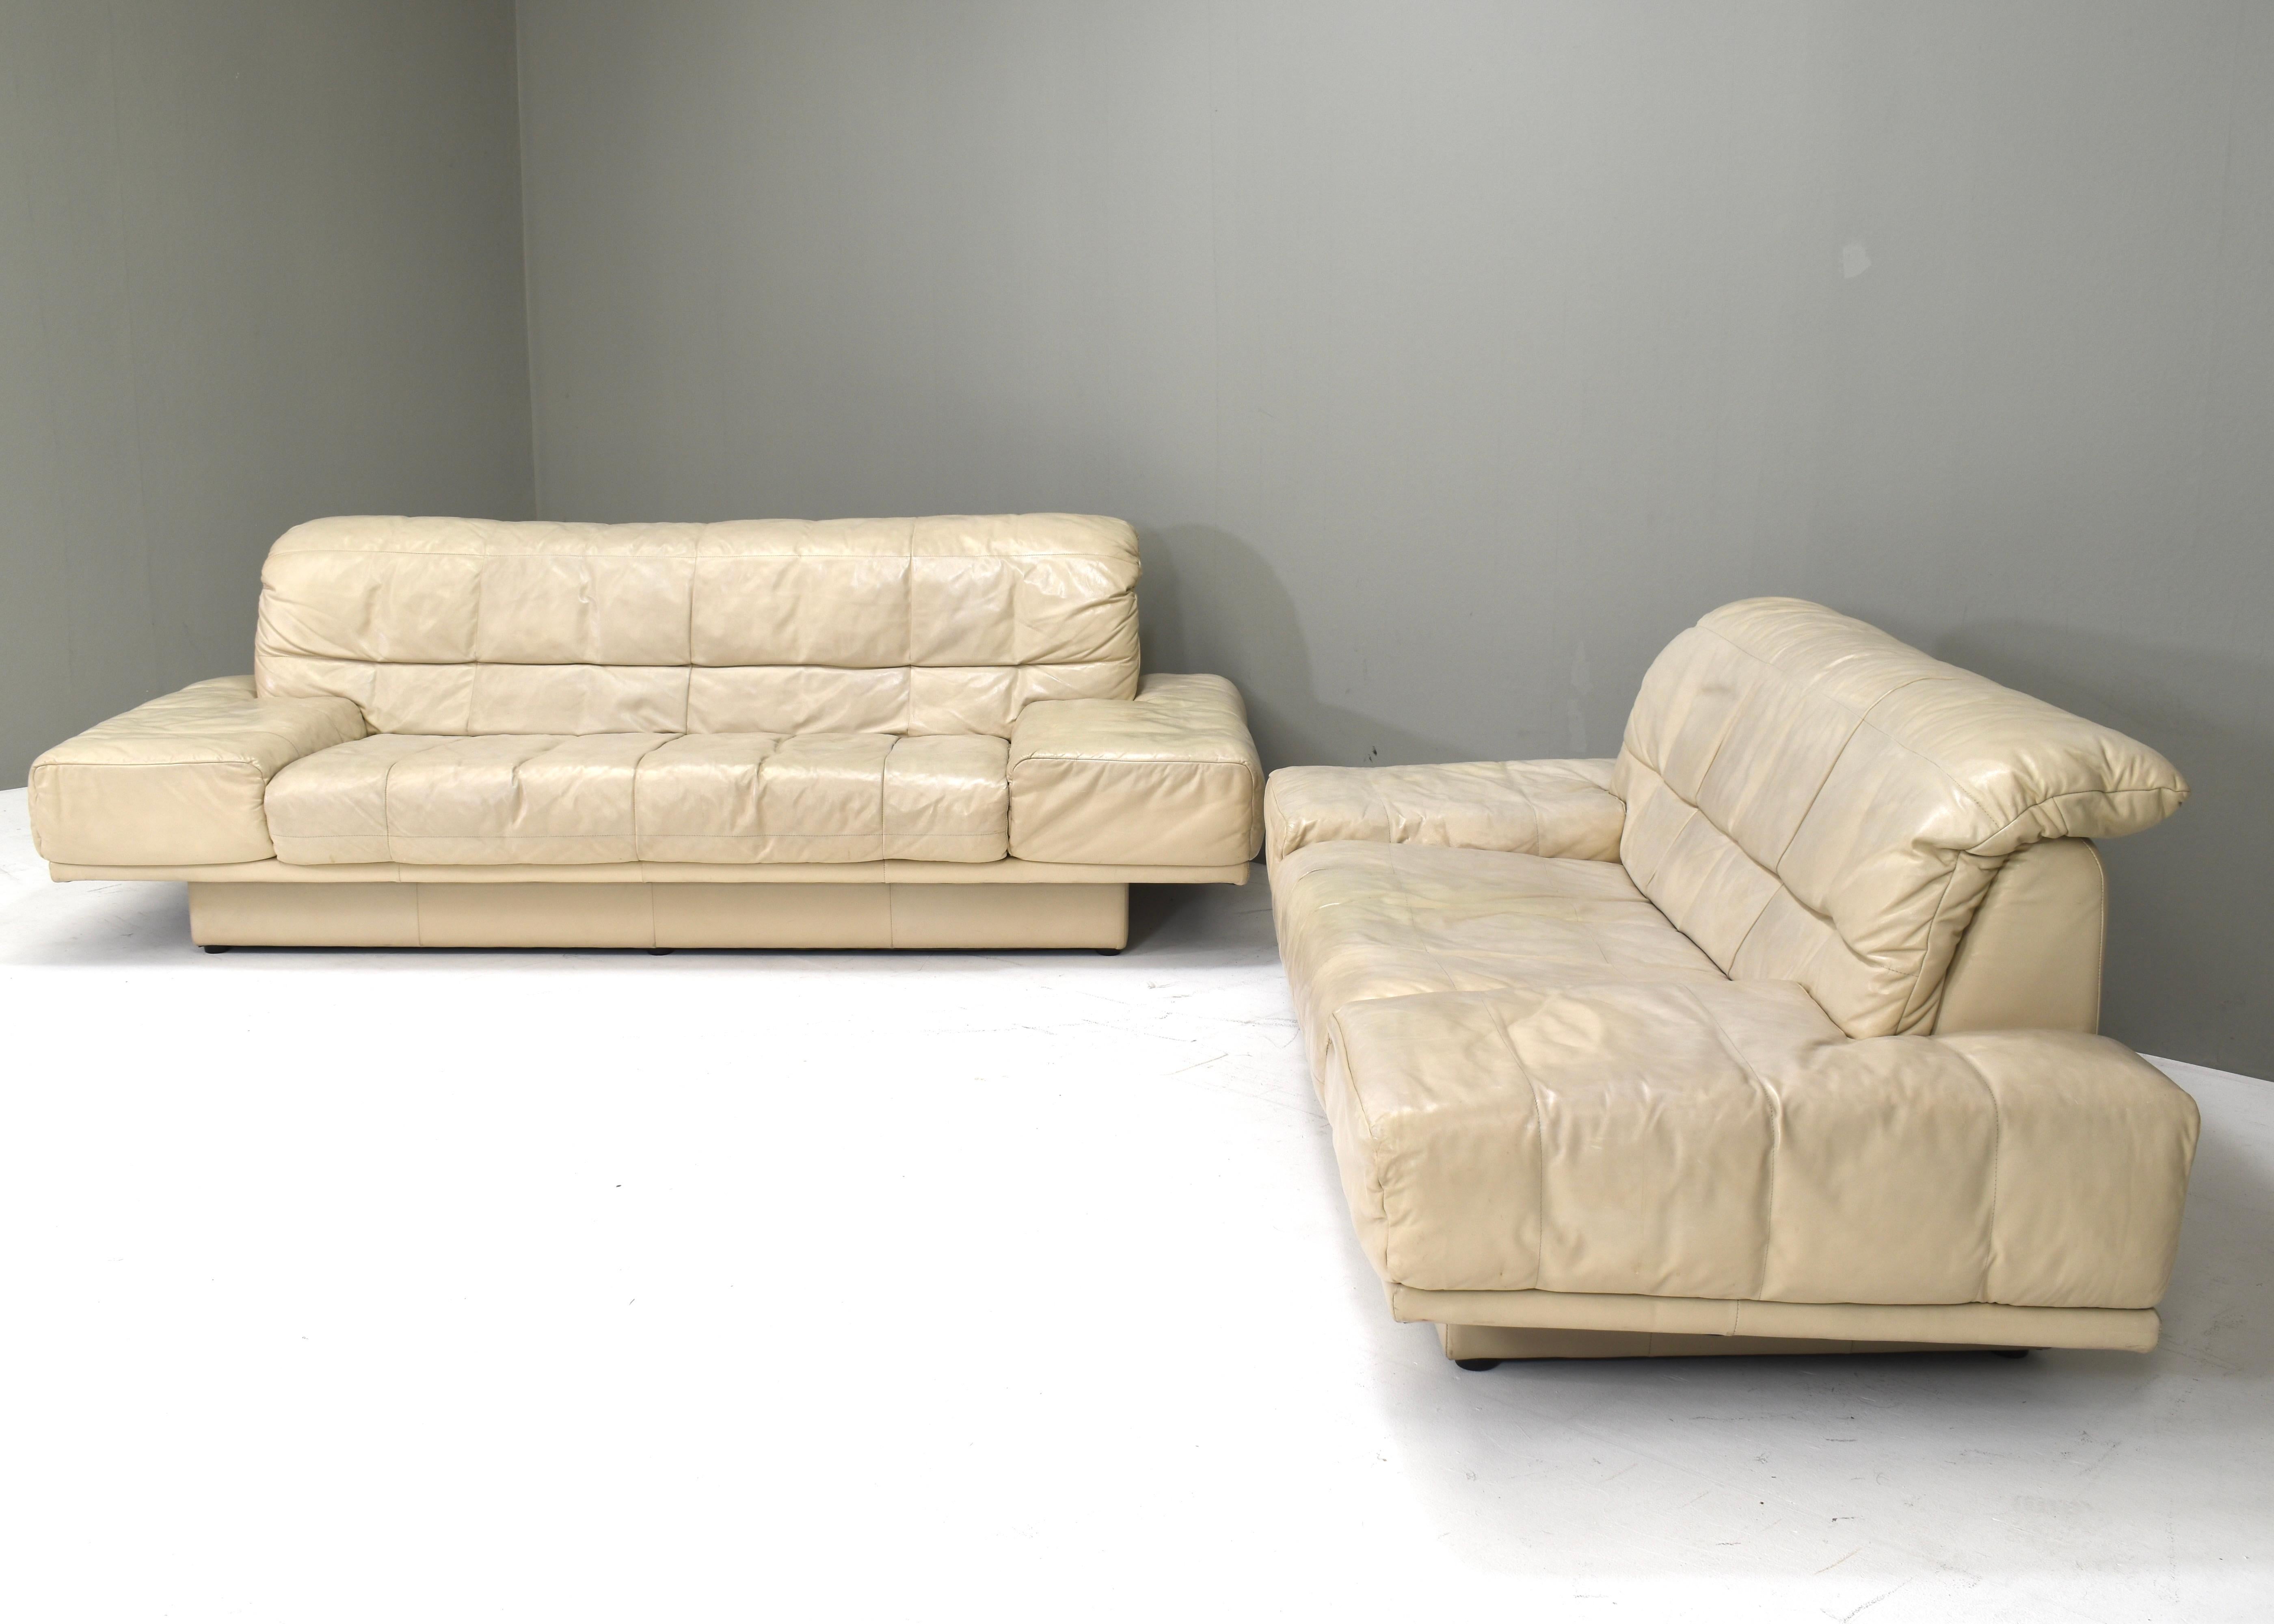 Pair of Rolf Benz sofa’s in ivory colored leather. Also sold separate.

Designer: Unknown
Manufacturer: Rolf Benz
Country: Germany
Model: Sofa
Design period: circa 1980-90
Date of manufacturing: circa 1980-90
Size wdh:
3 seat sofa: 233x87x72 seat